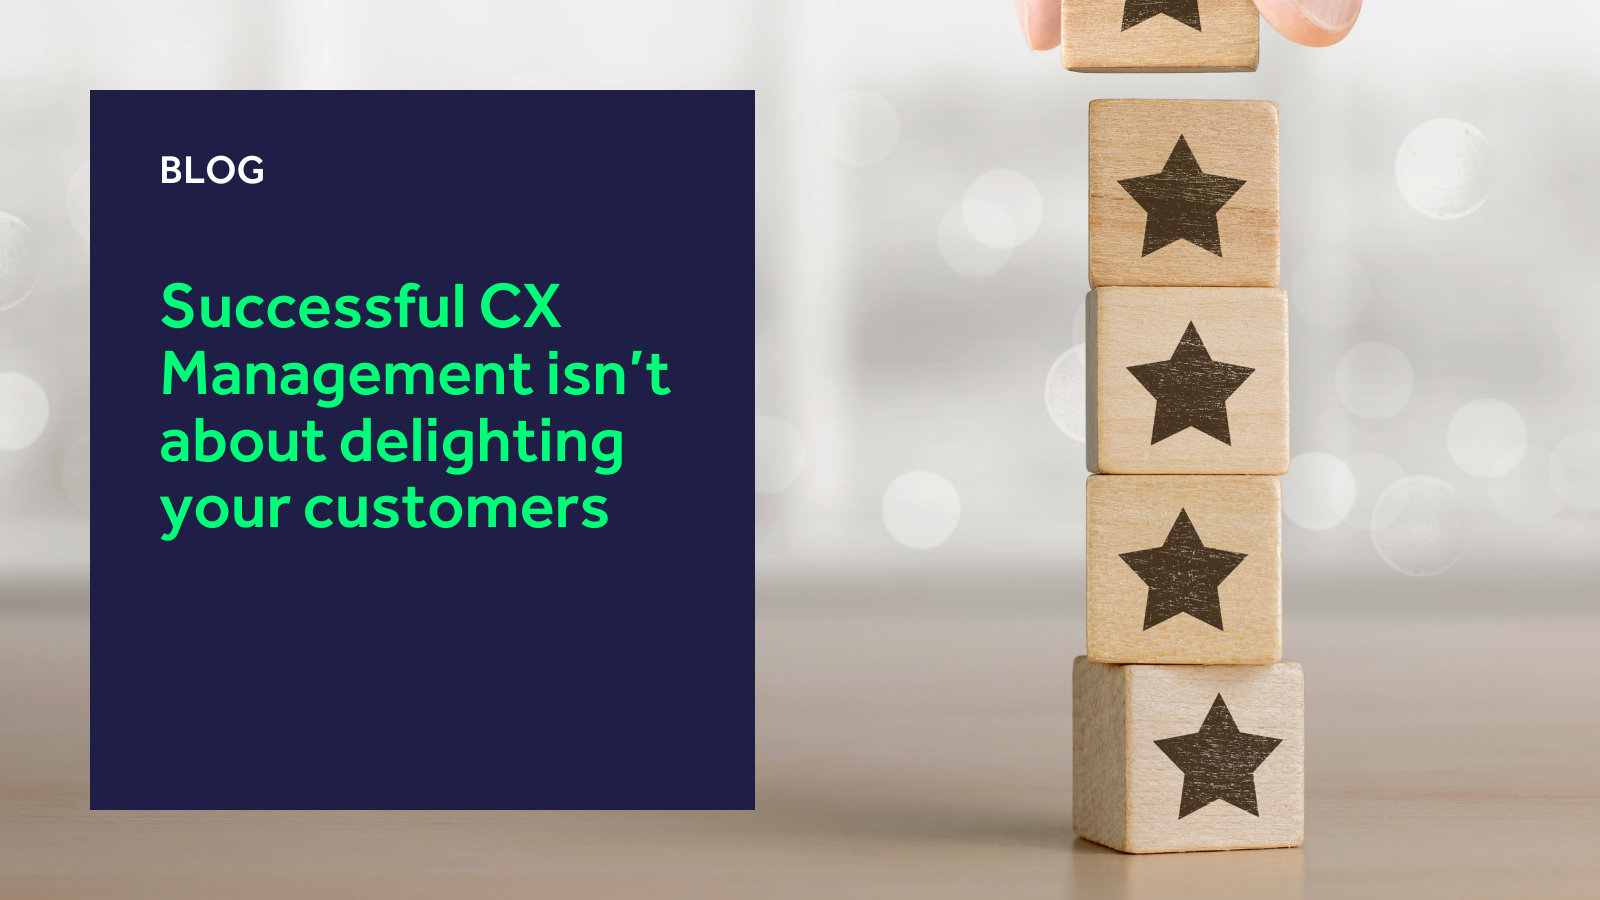 Successful CX Management isn’t about delighting your customers